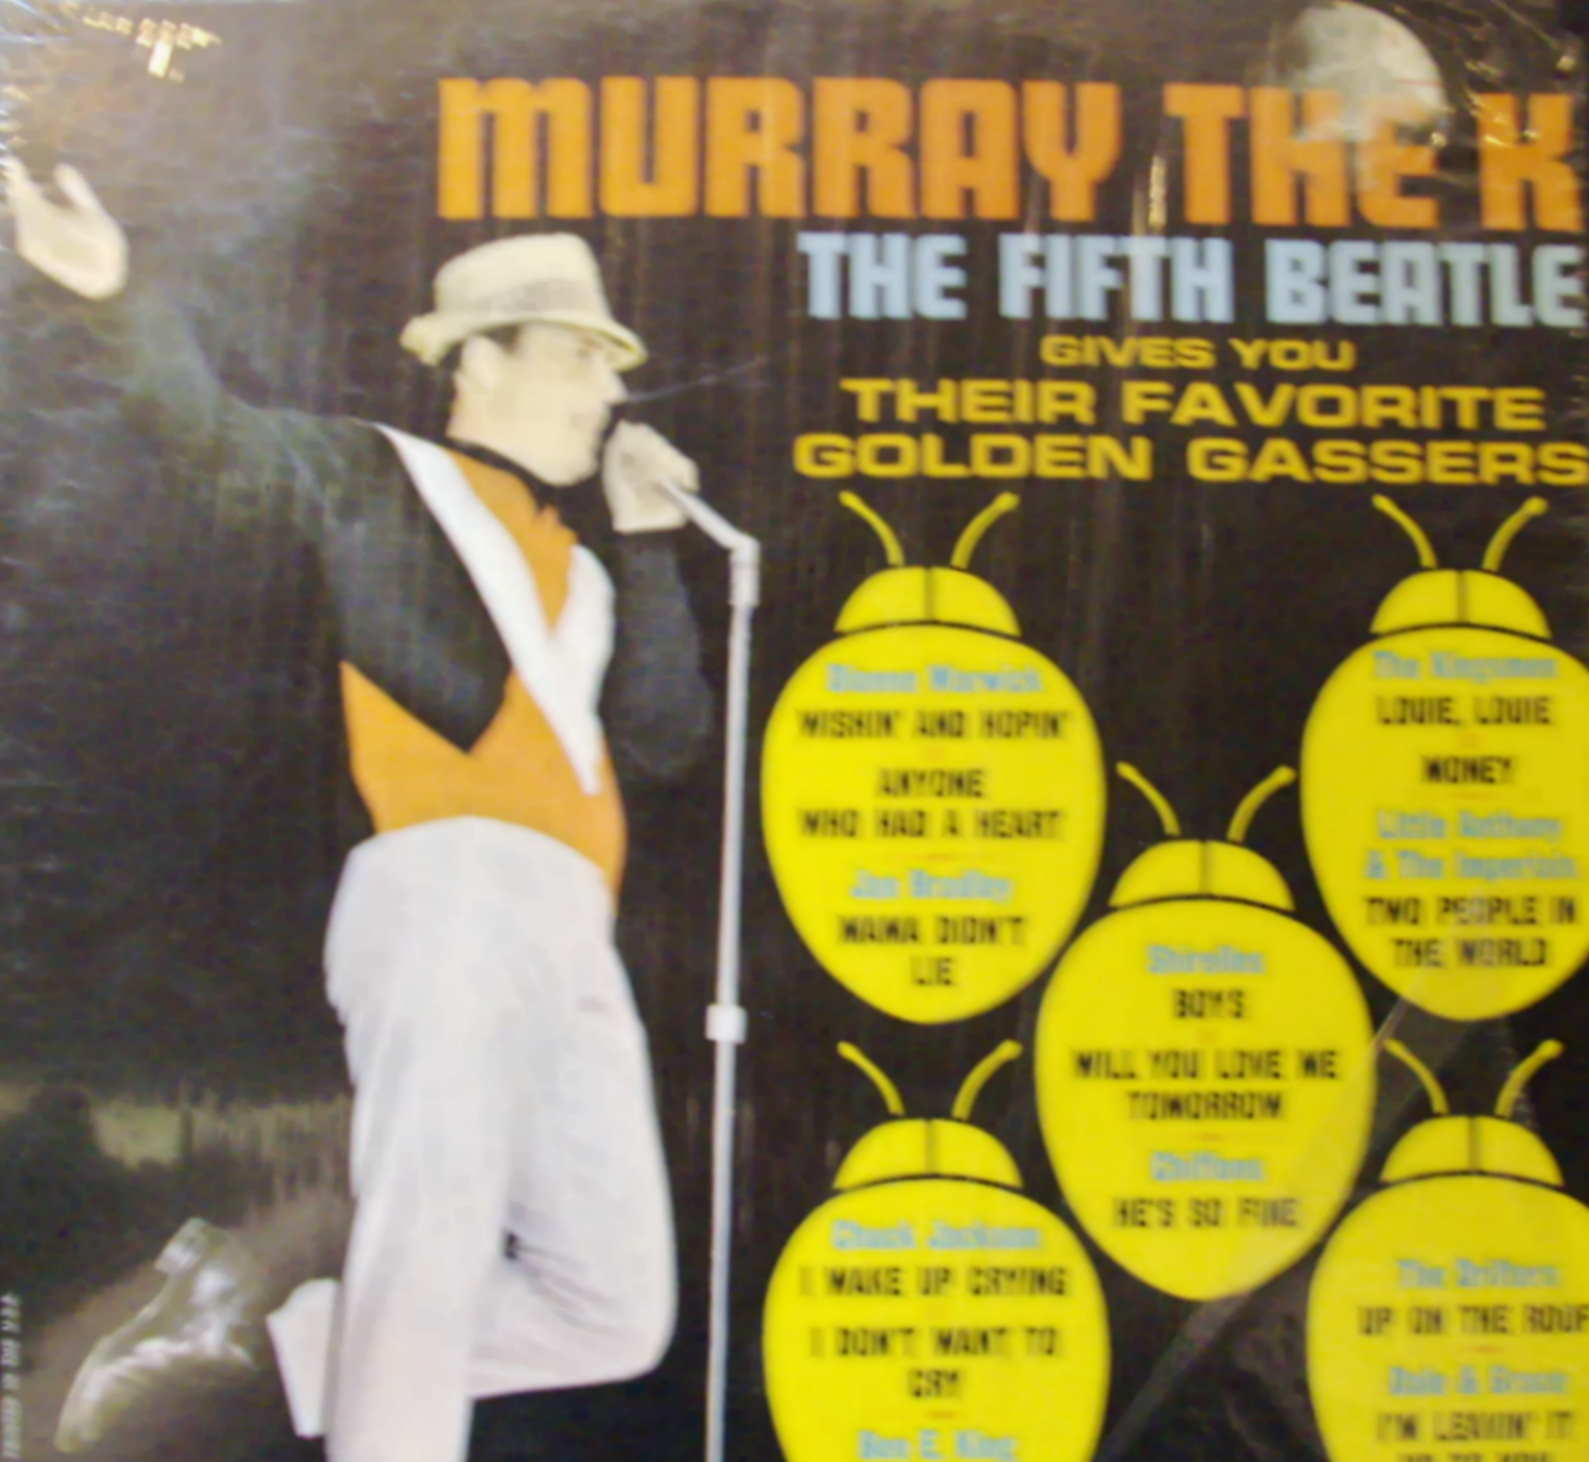 Murray the K / Fifth Beatle Gives You Their Favorite Golden Gassers